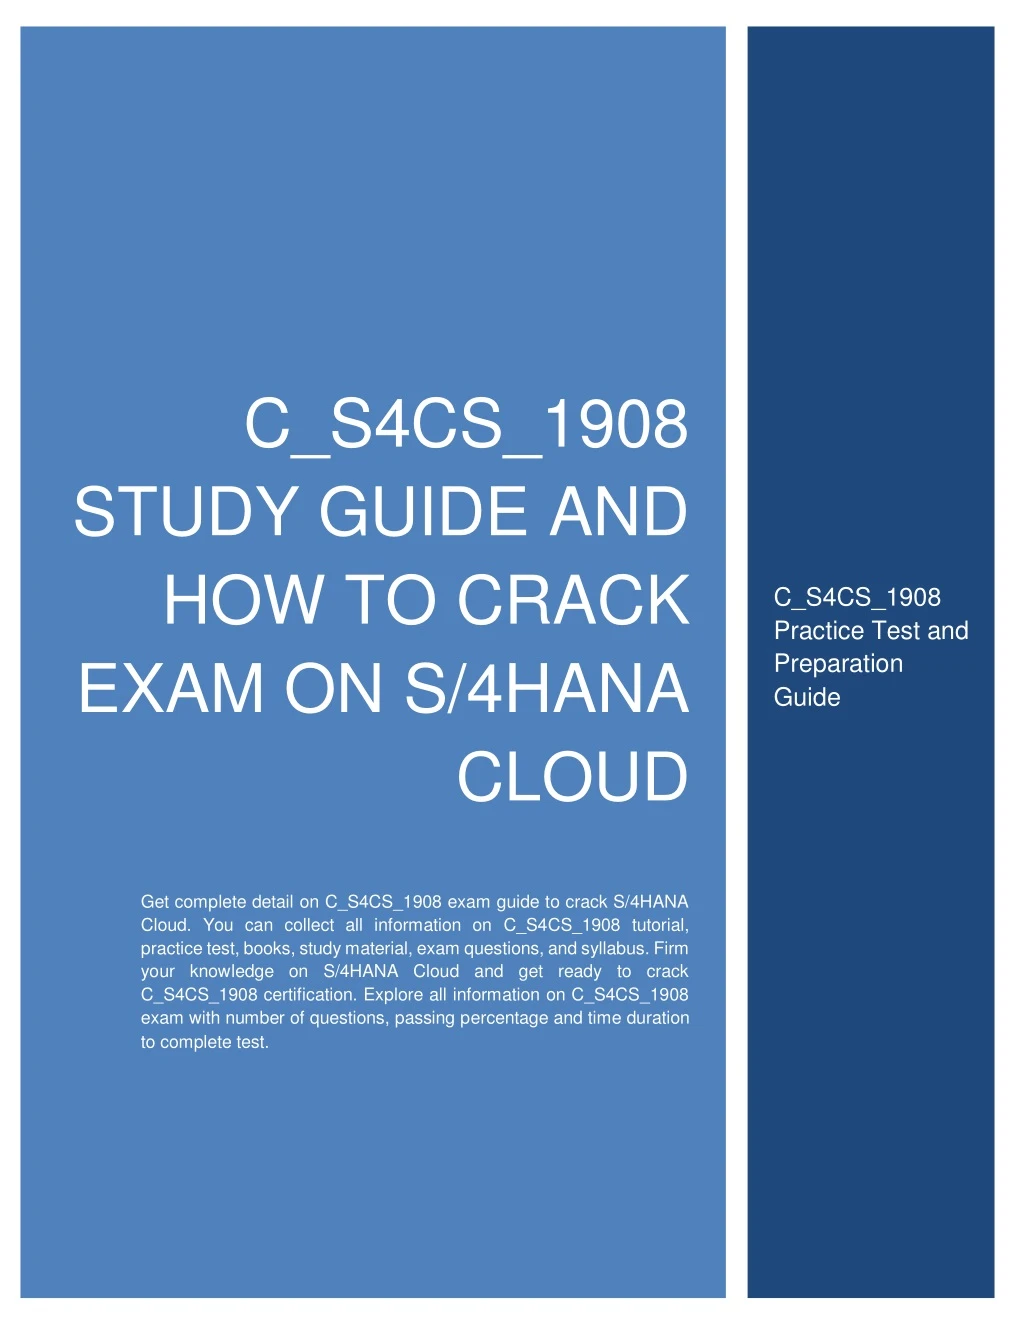 c s4cs 1908 study guide and how to crack exam